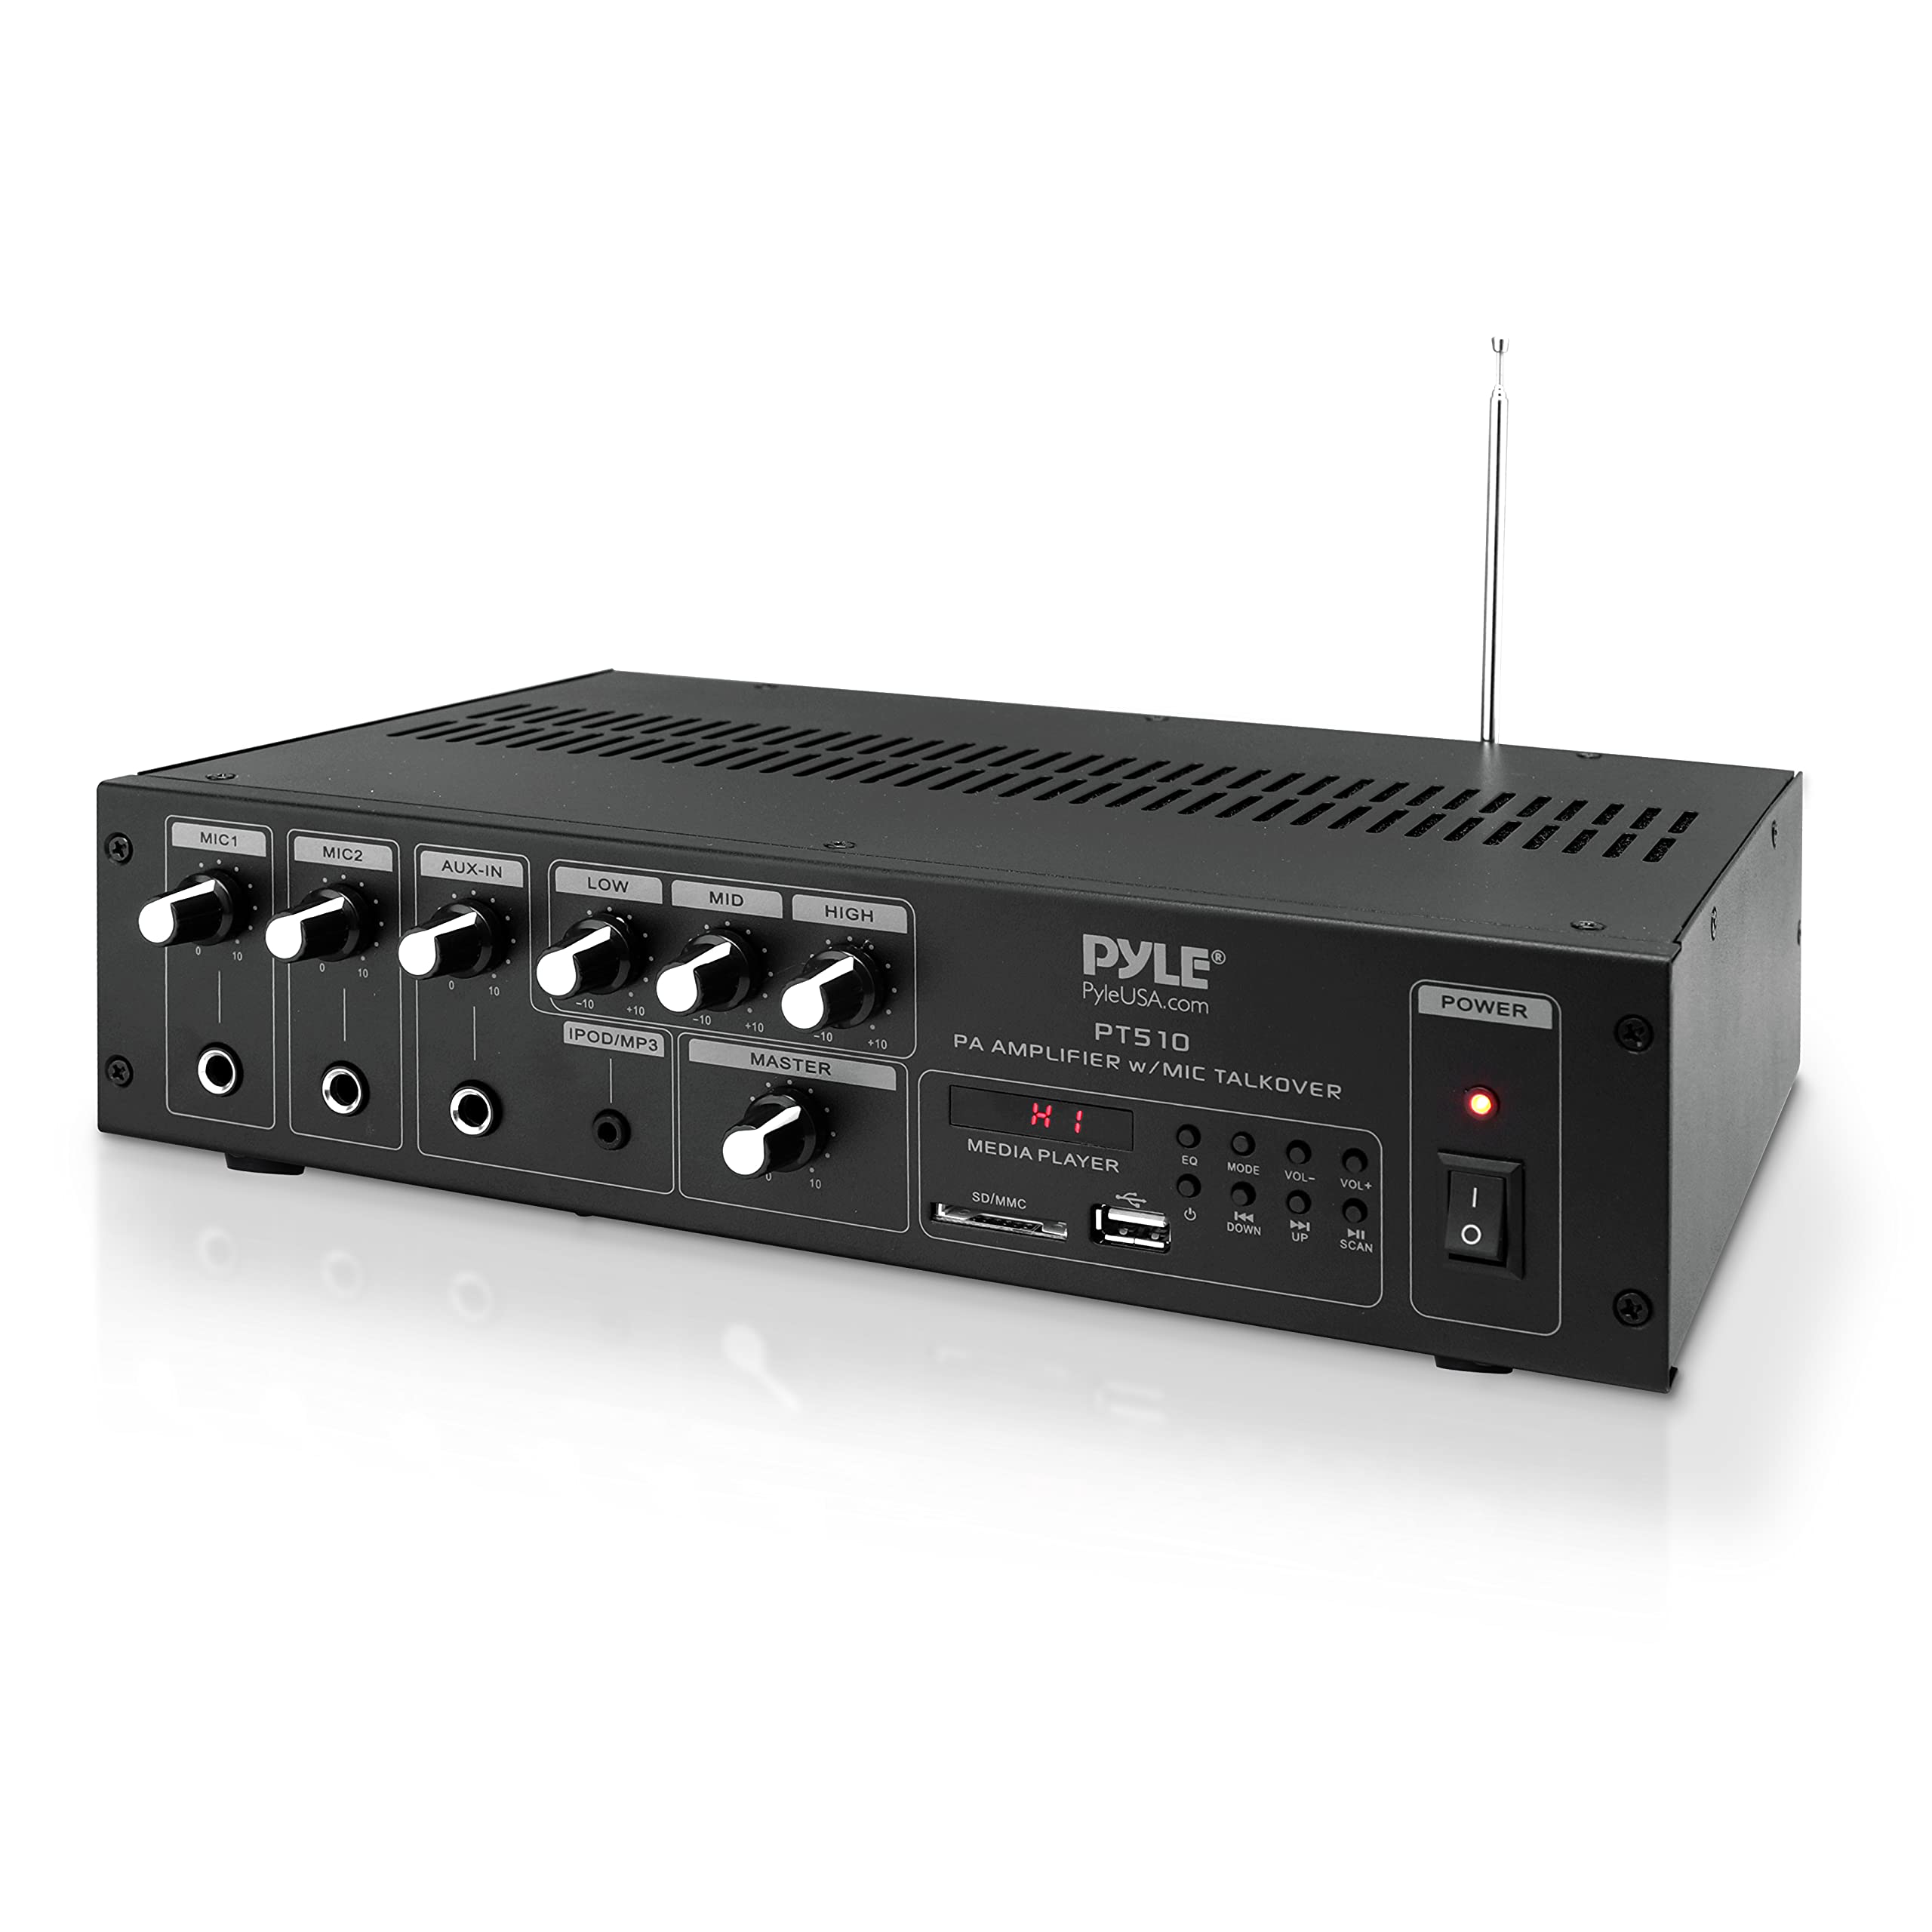 Pyle Home Audio Power Amplifier Mixer - 240W 5 Channel Sound Stereo Entertainment Receiver Box w/ FM Radio Antenna,USB,RCA, AUX,LED,2 MIC IN - For Speaker, Studio Theater, PA System Use -  PT510 BLACK